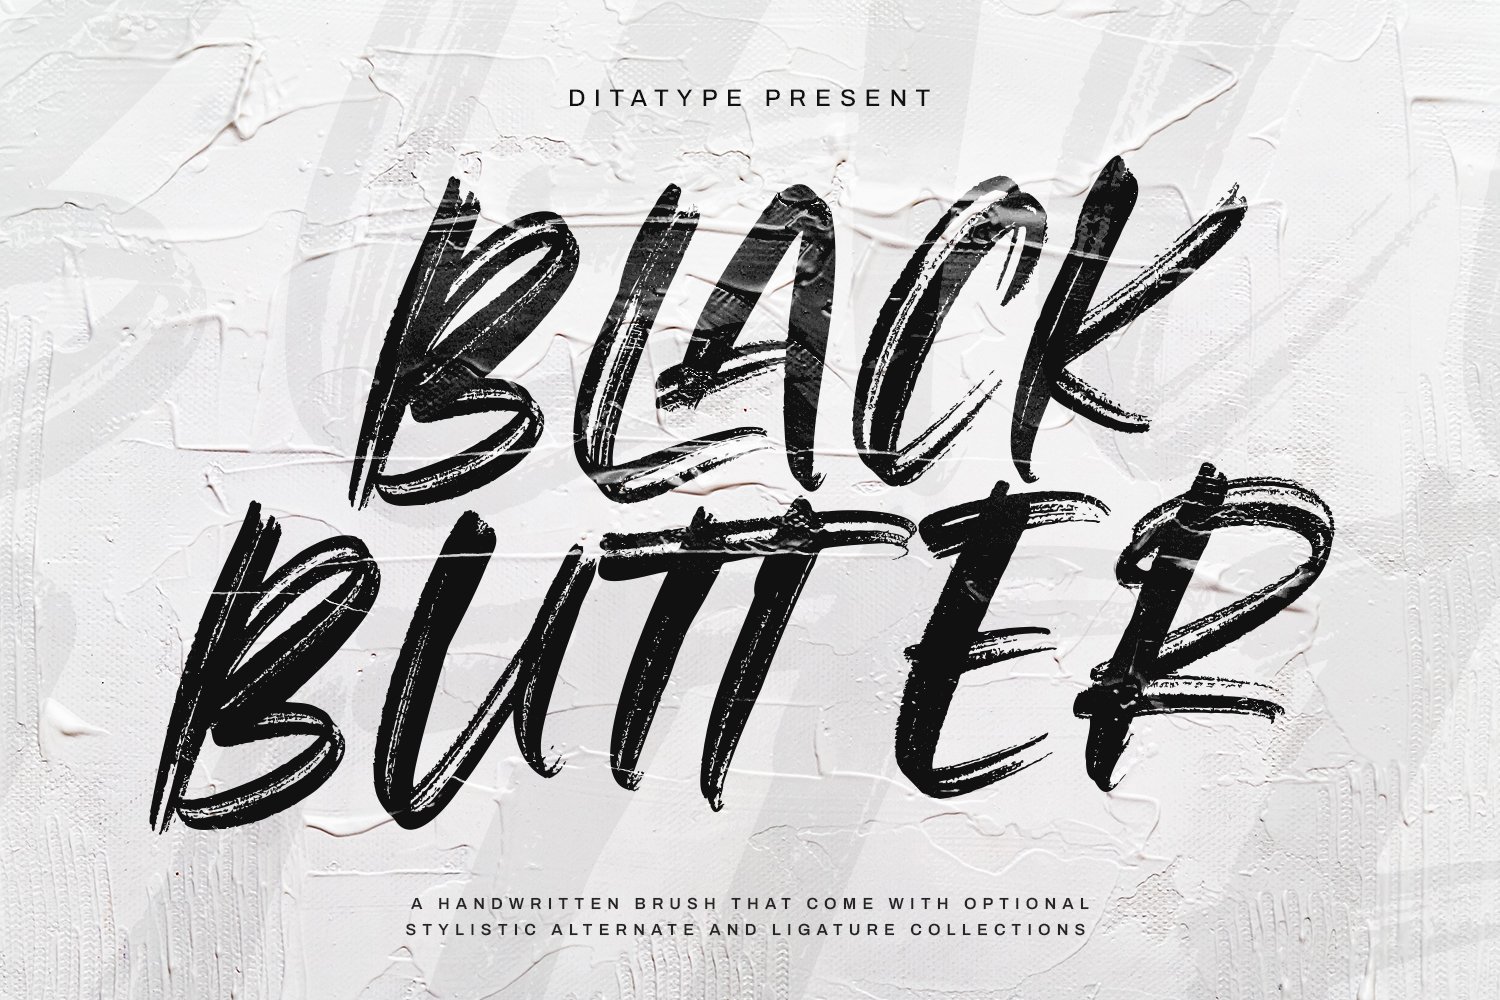 Black Buttercover image.